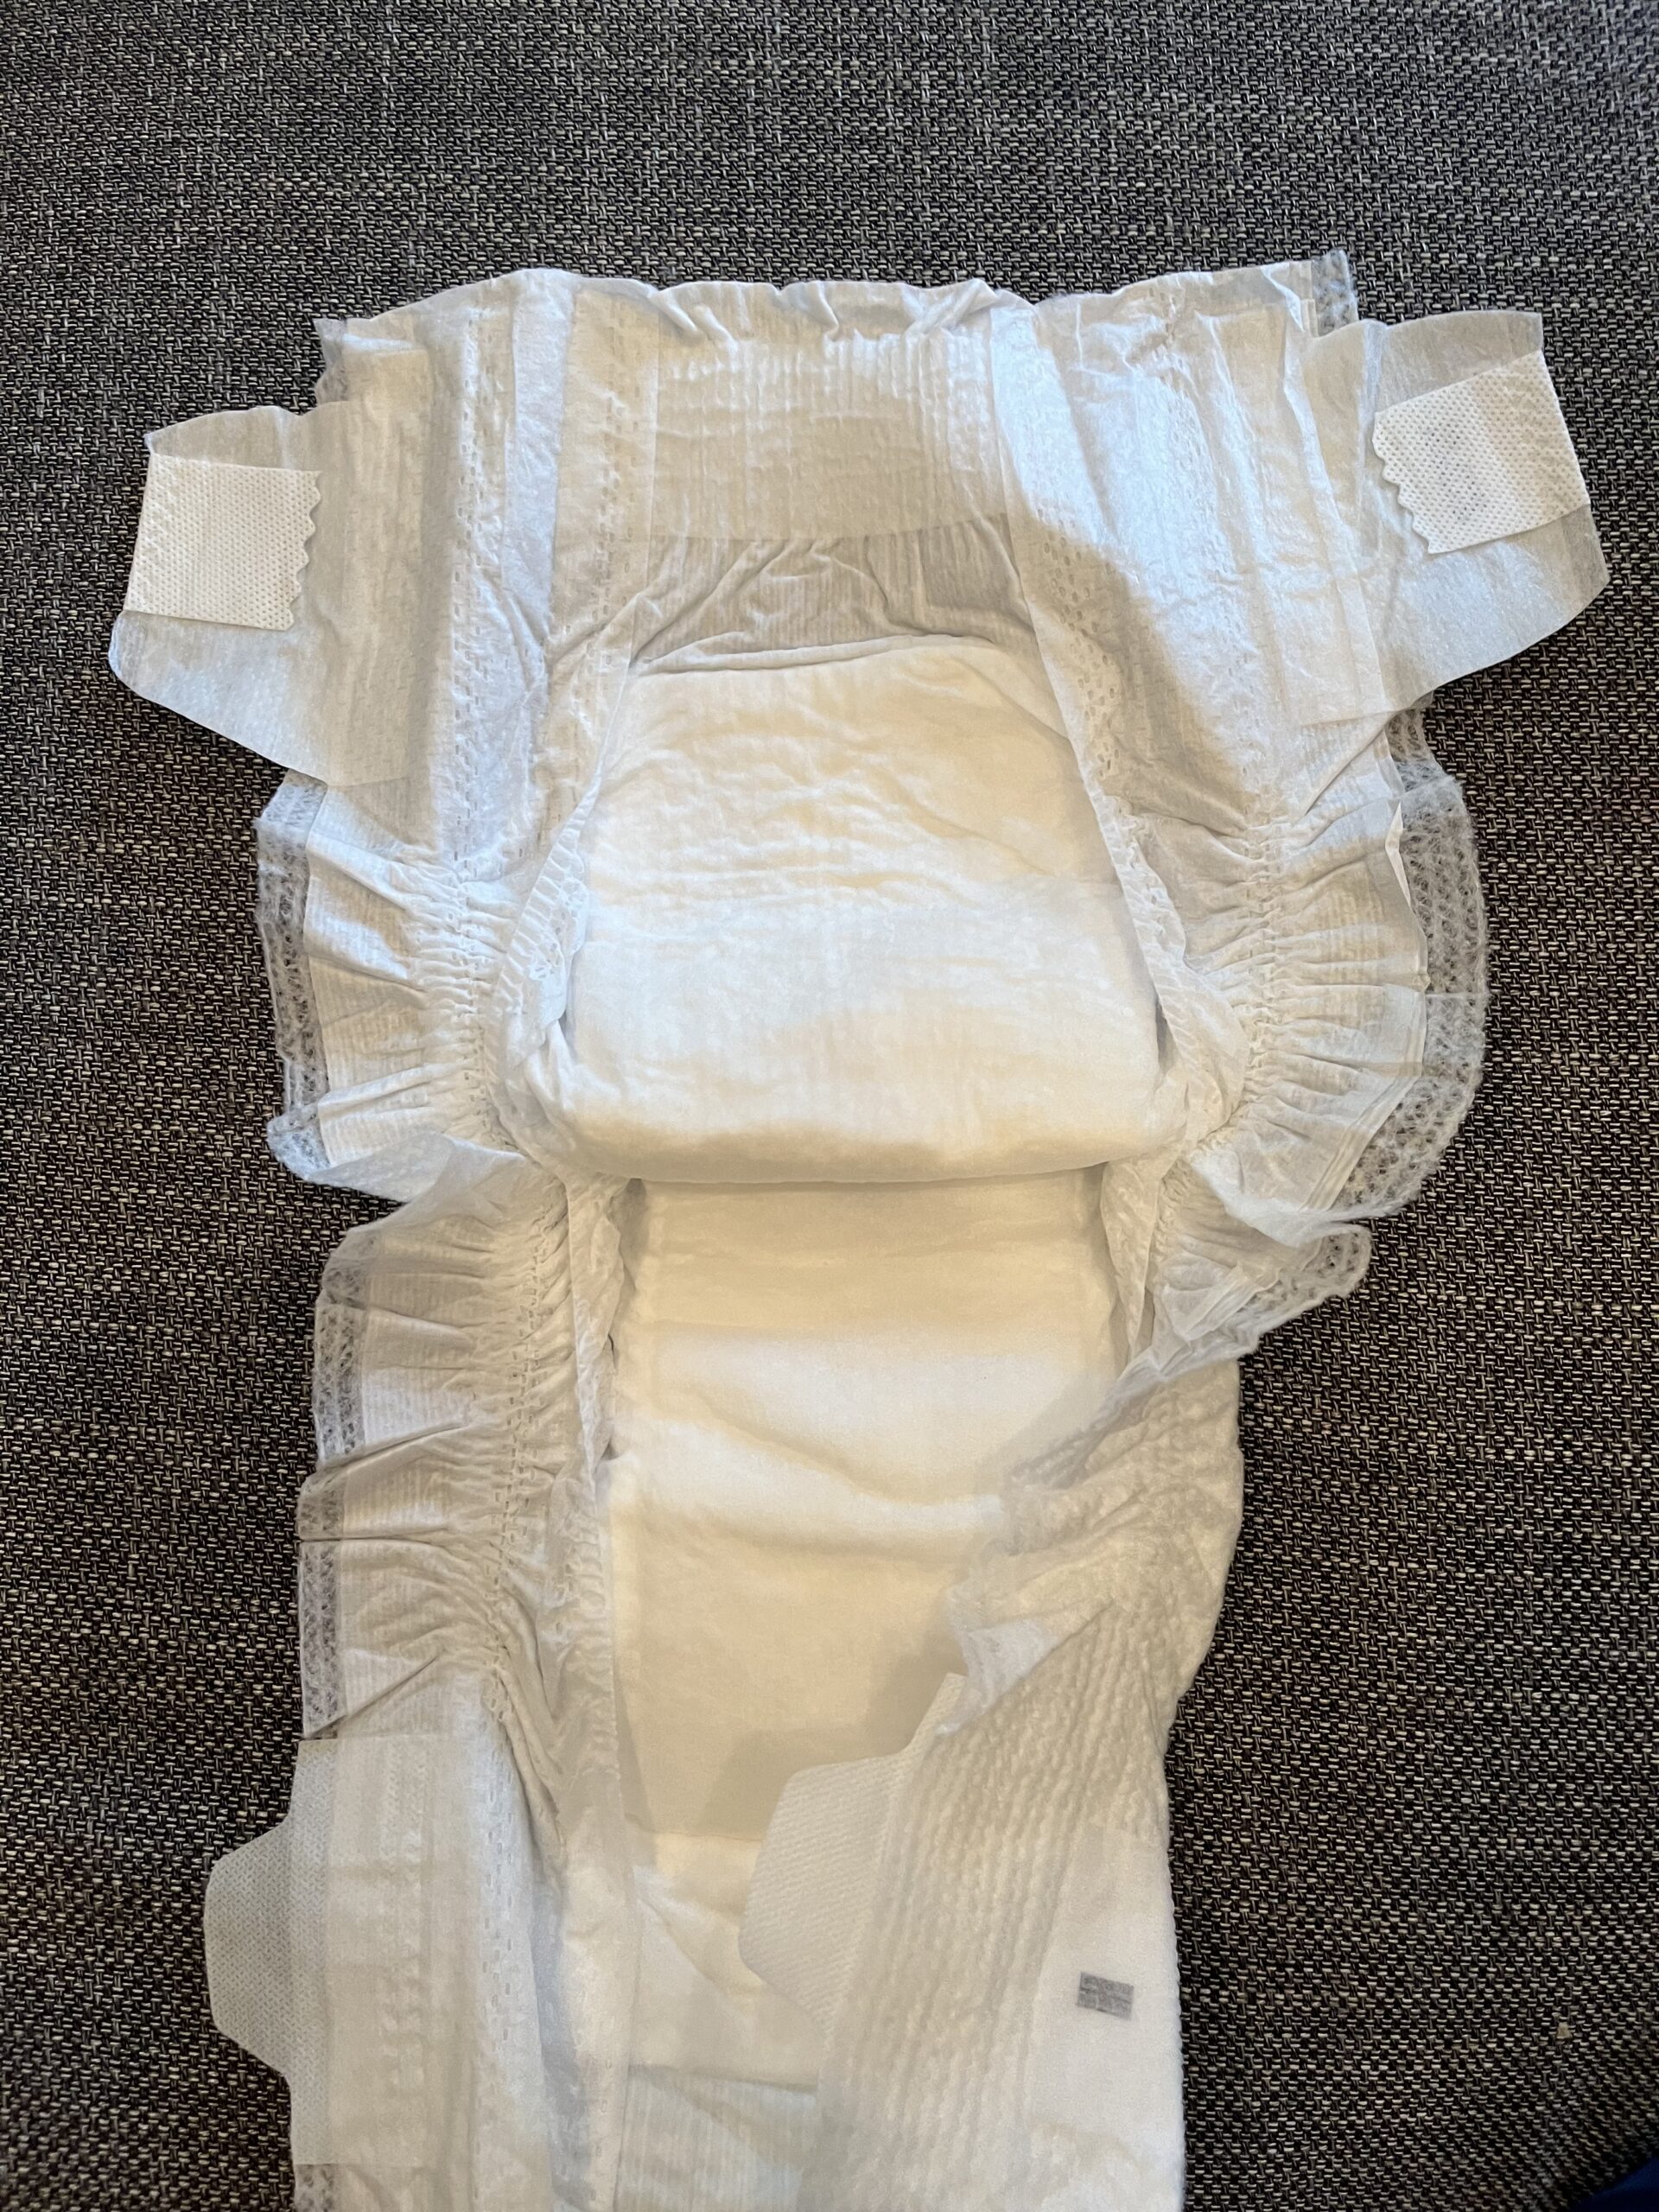 Coterie Diapers Review | Check For Baby Care Ease and Quality